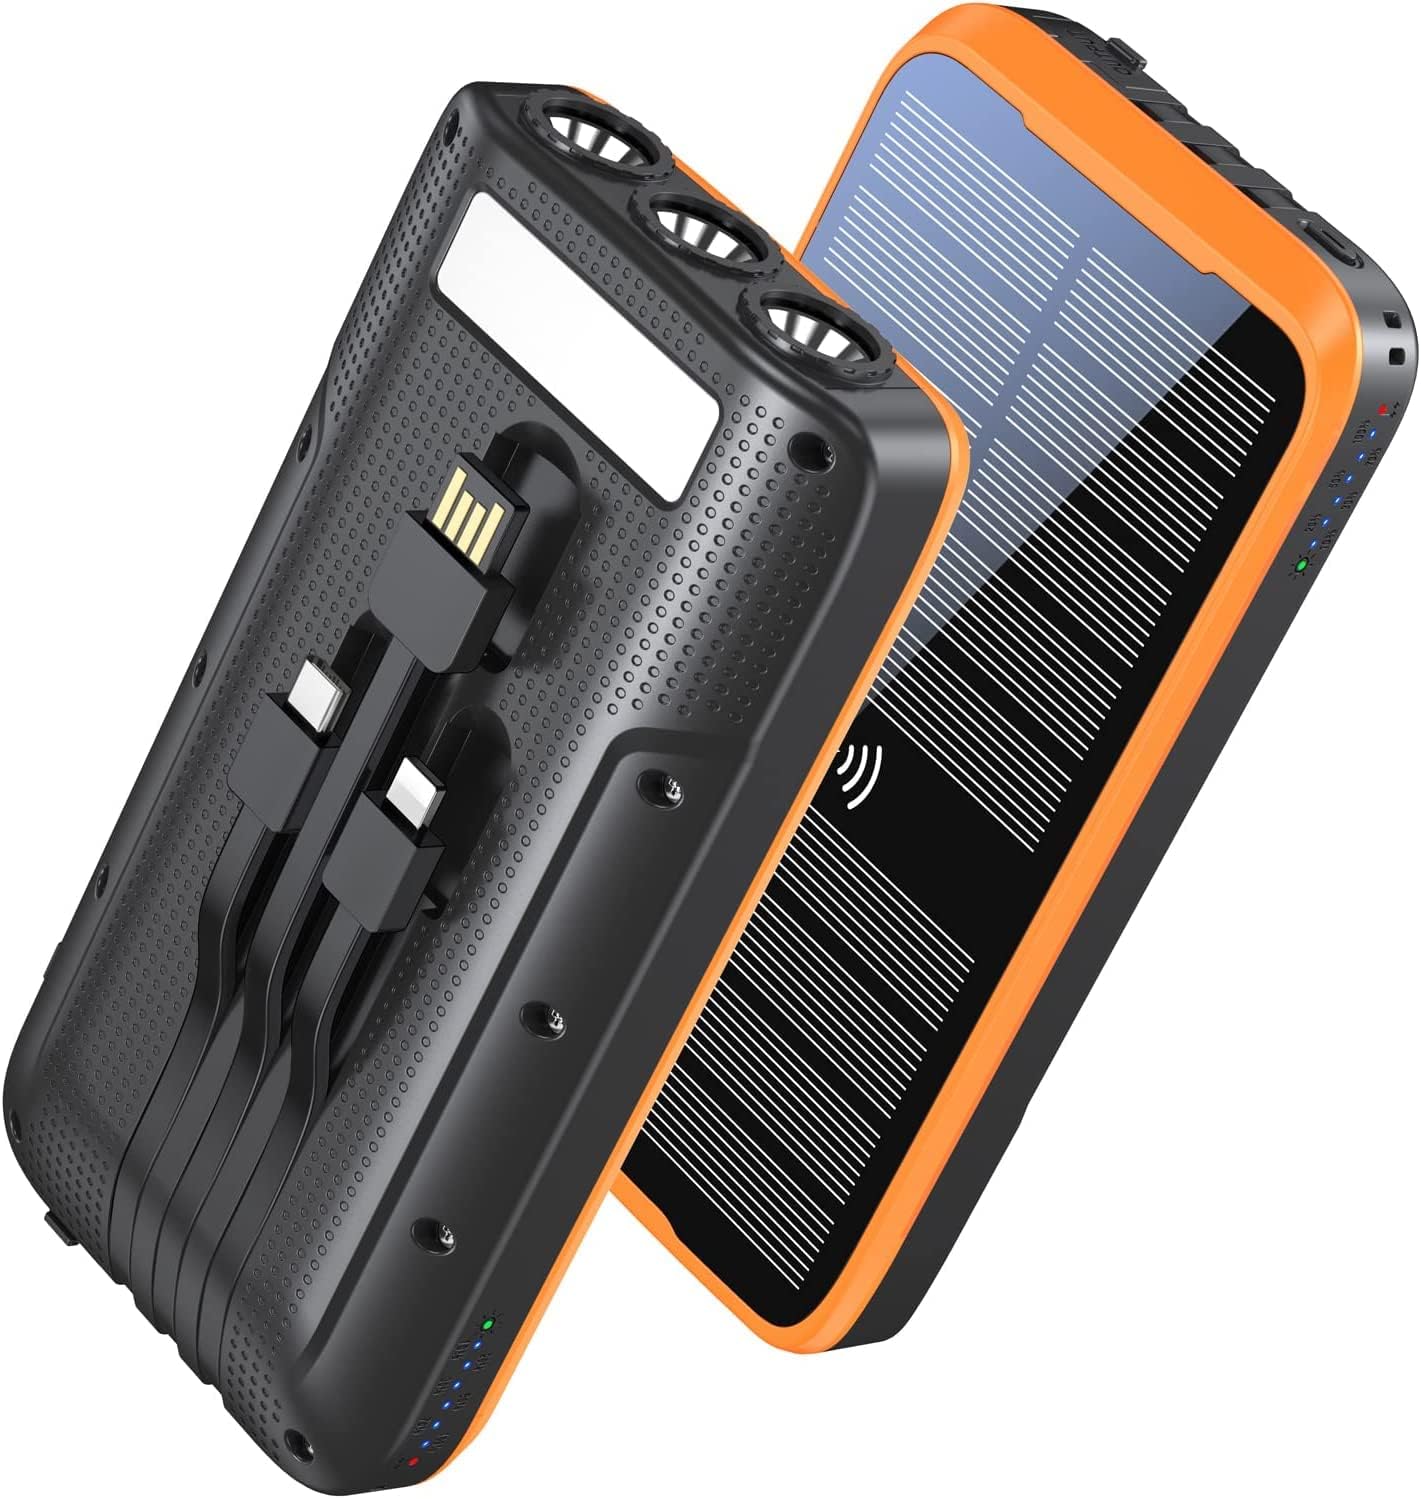 Solar-Charger-Power-Bank-The Best Gifts For Travelers